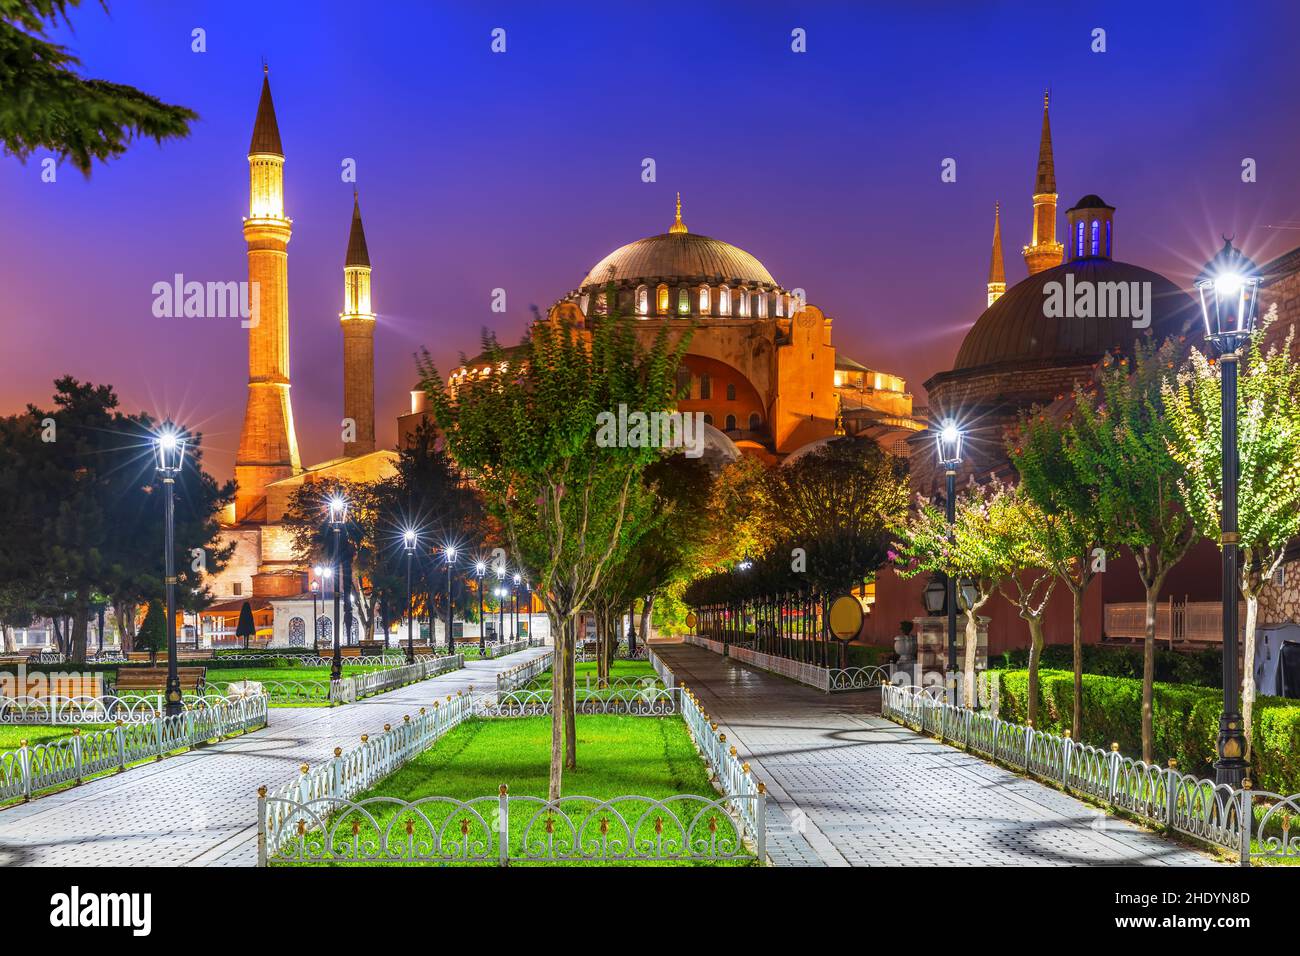 sultan ahmed mosque, blue mosque, sultan ahmed mosques, blue mosques ...